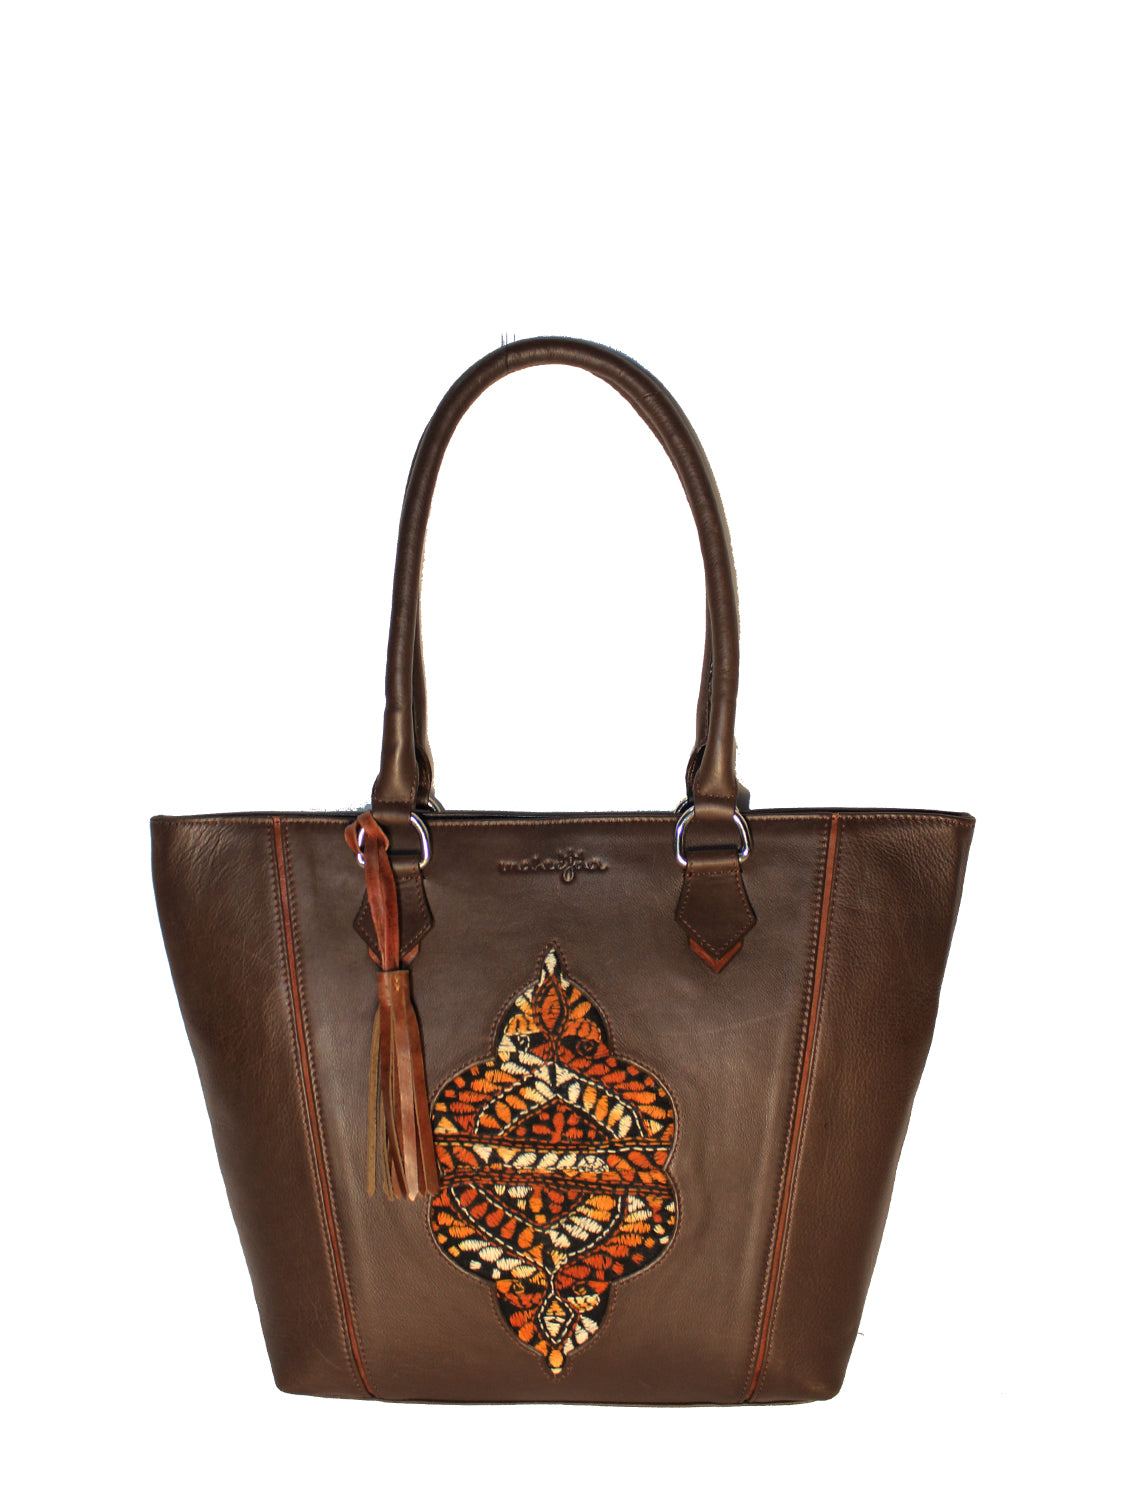 Genuine Leather-Kantha Handcrafted Bohemian Tote Bag (Brown)